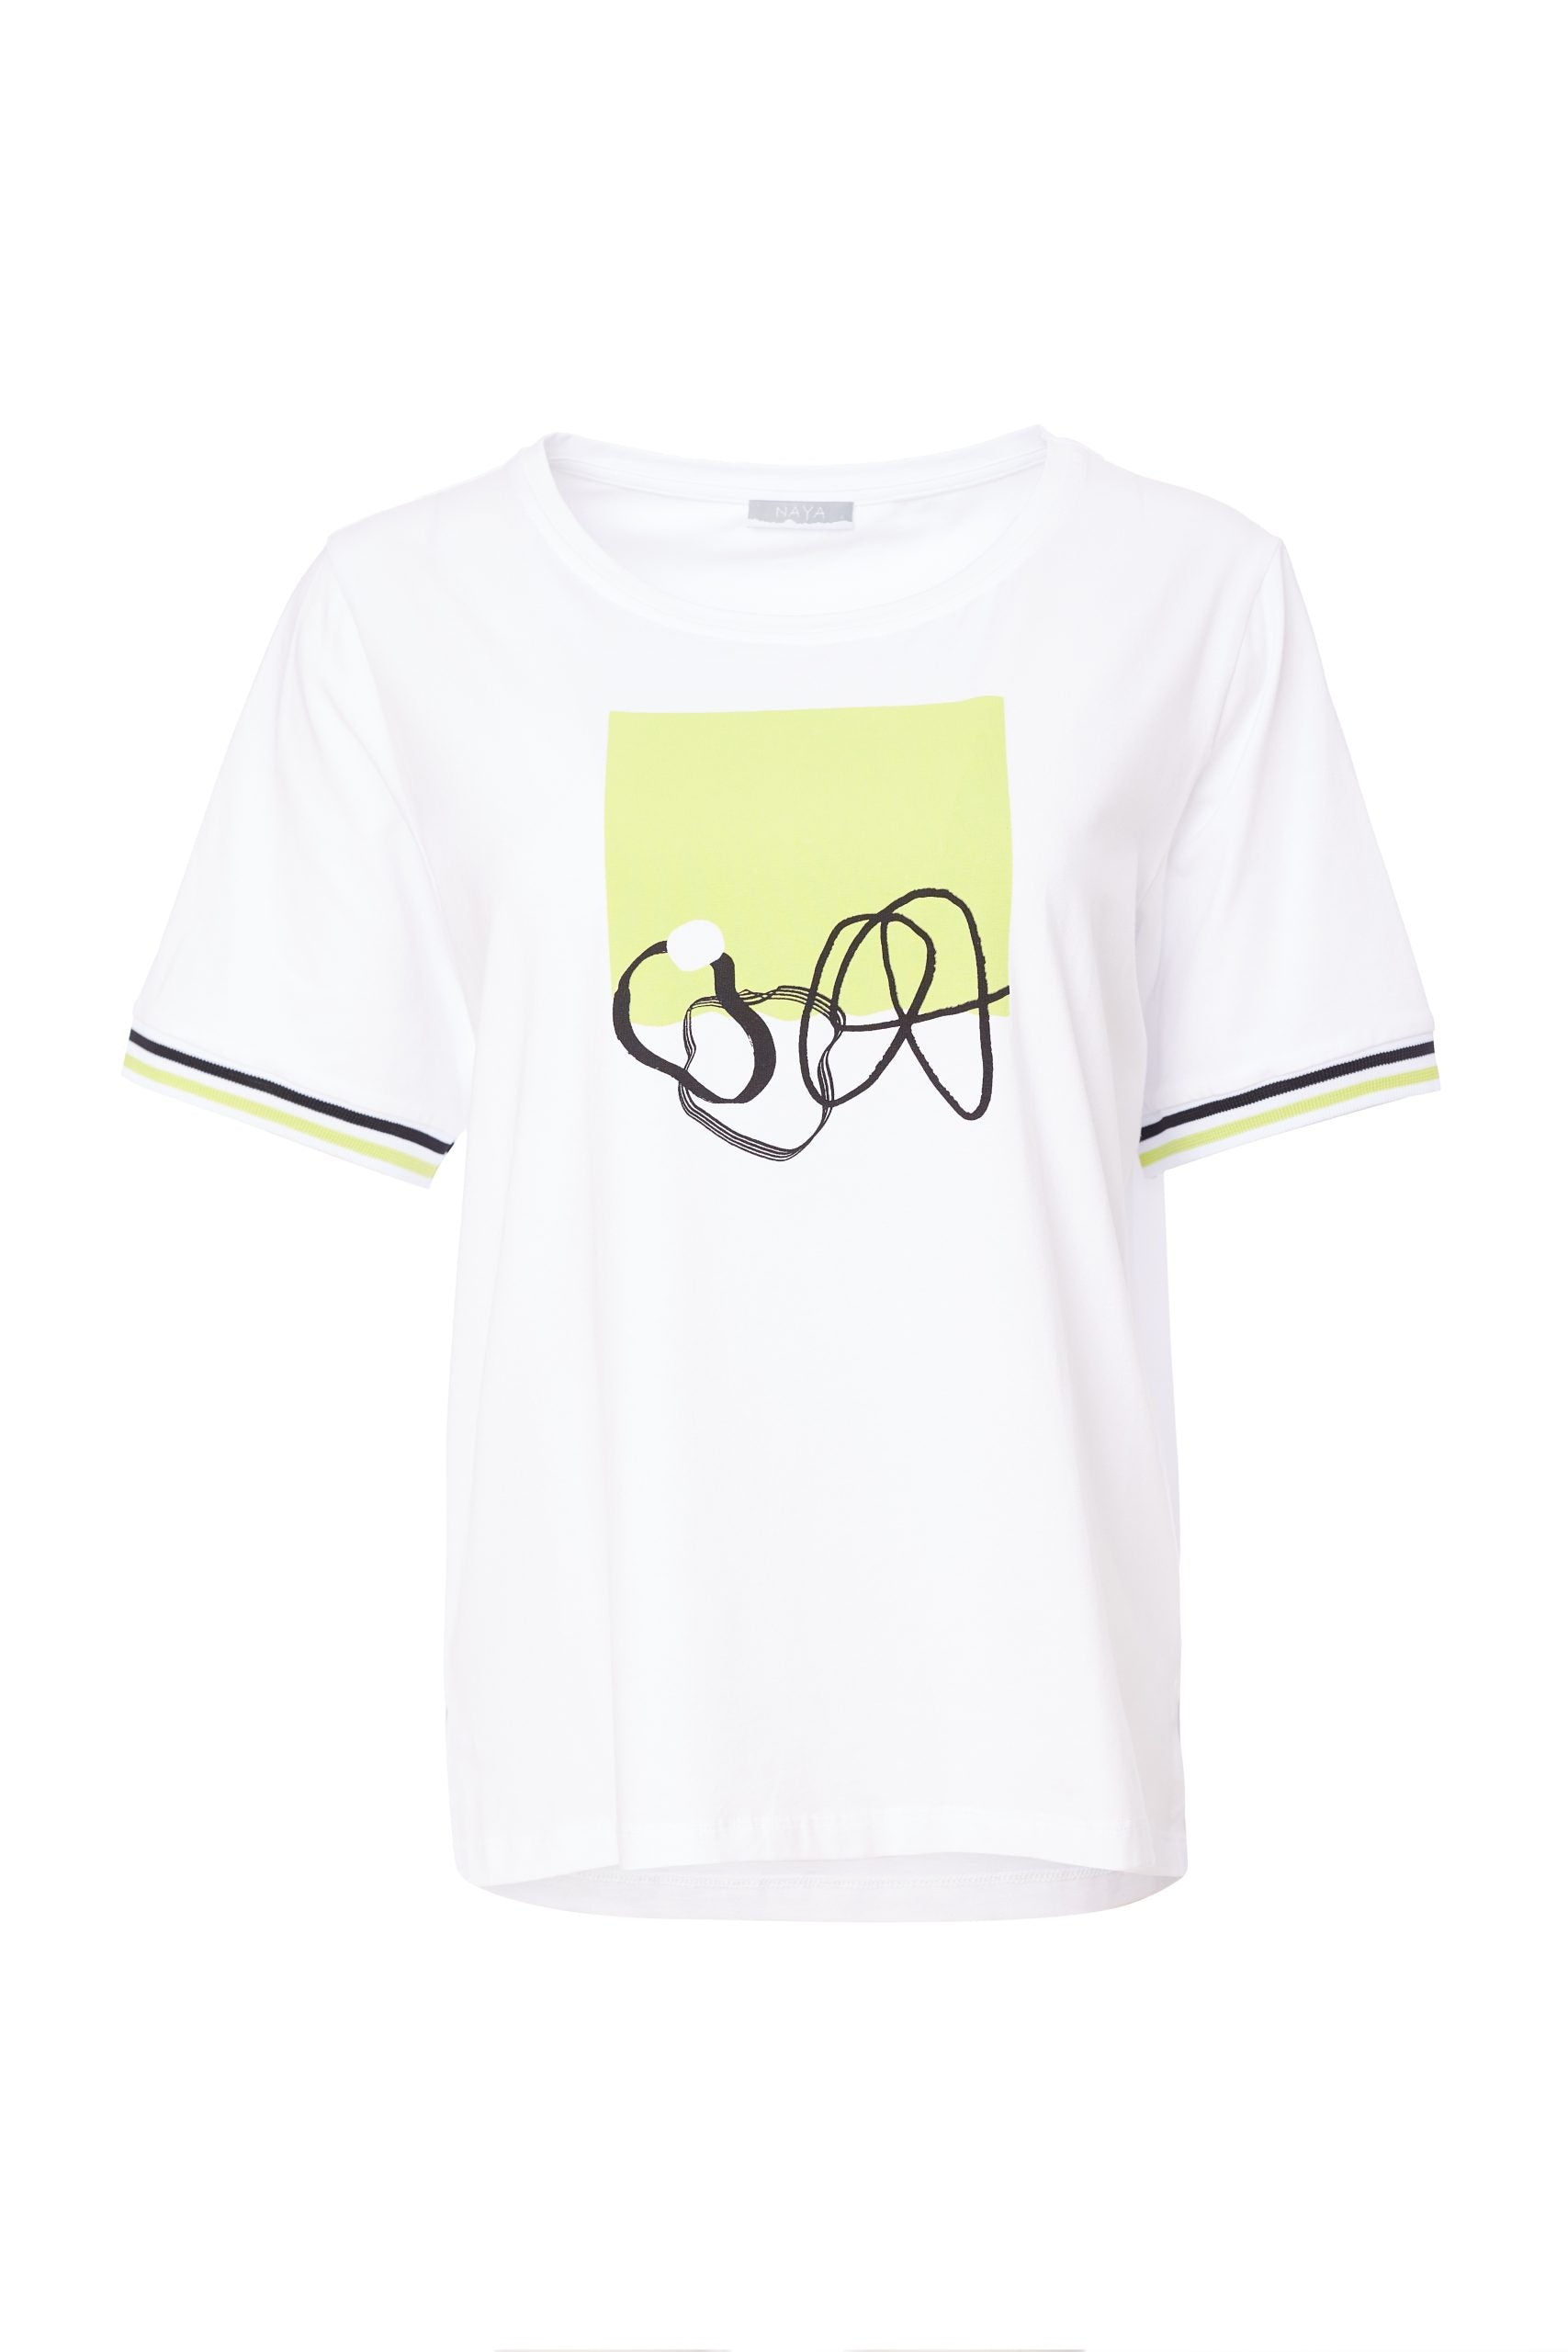 Place Print T-Shirt in White and Kiwi